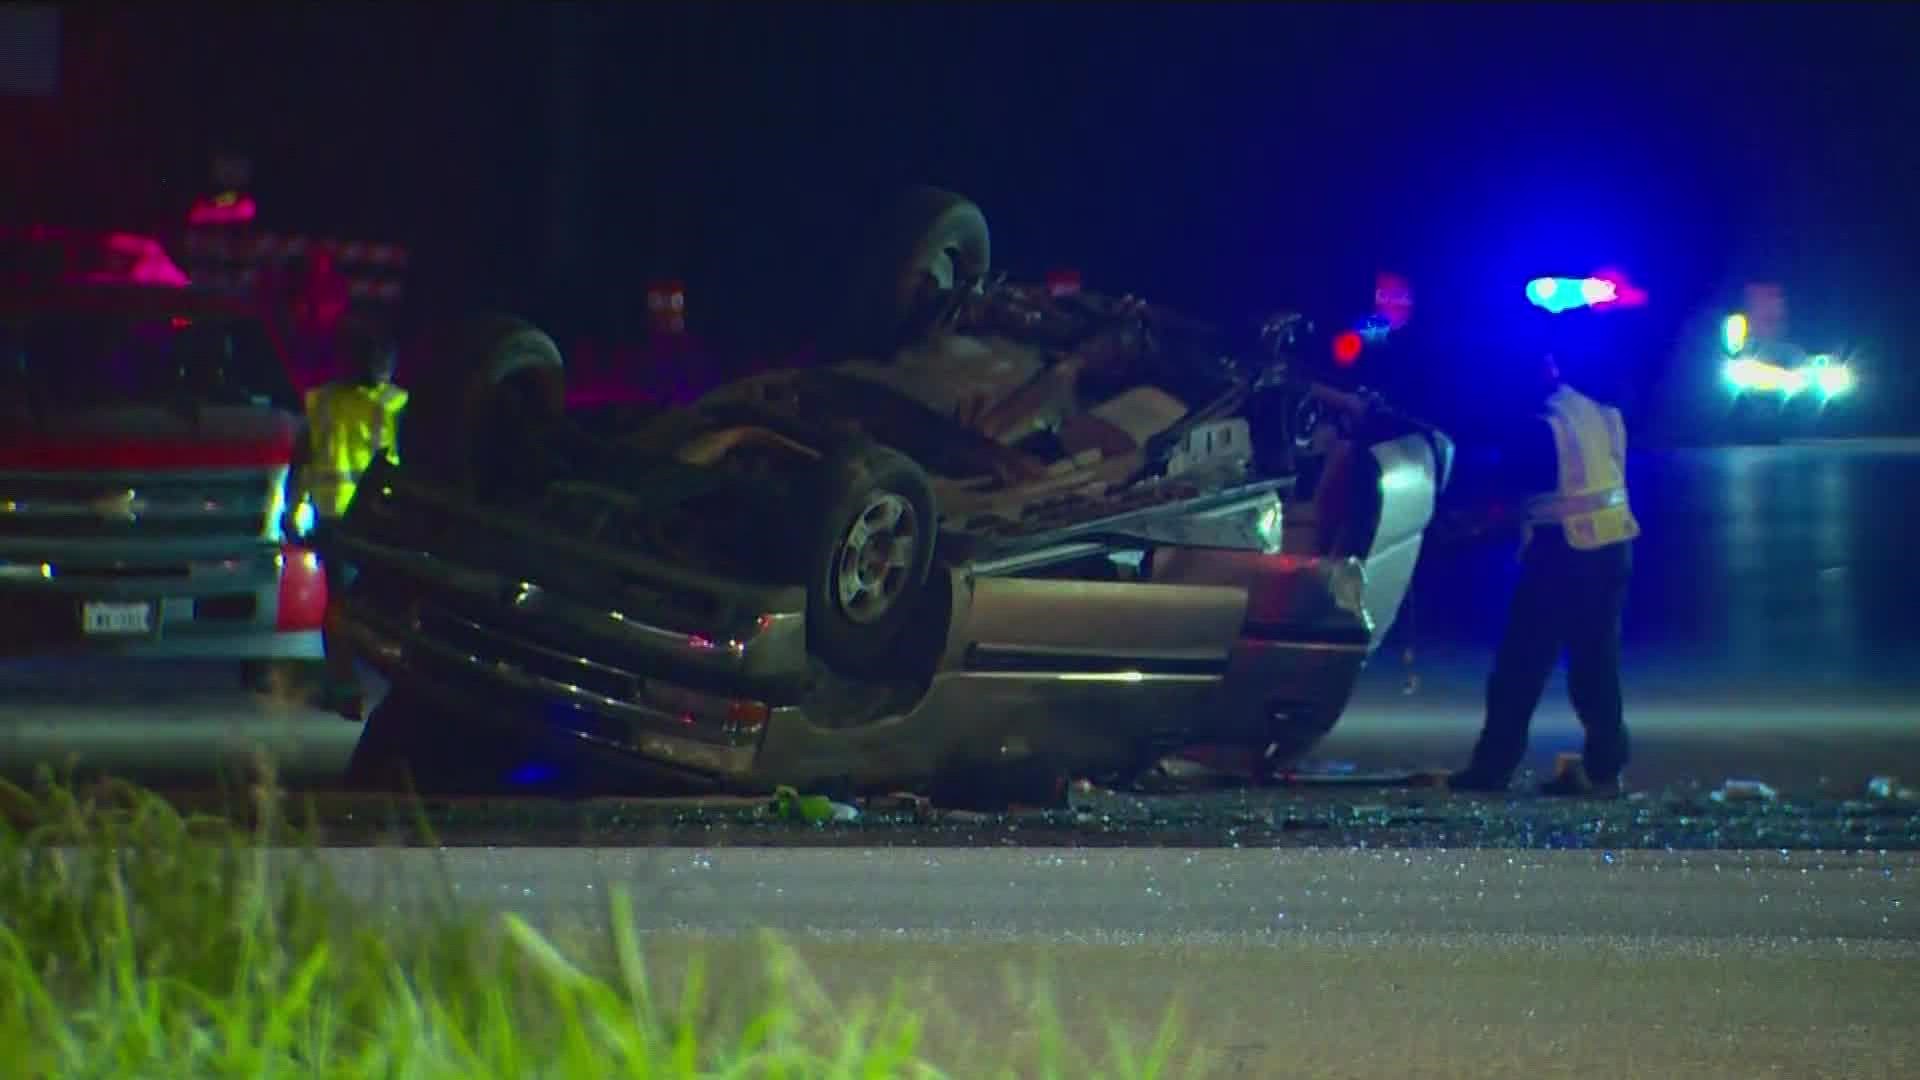 Police are investigating a fatal crash at FM 973 and Elroy Road in southeast Austin.